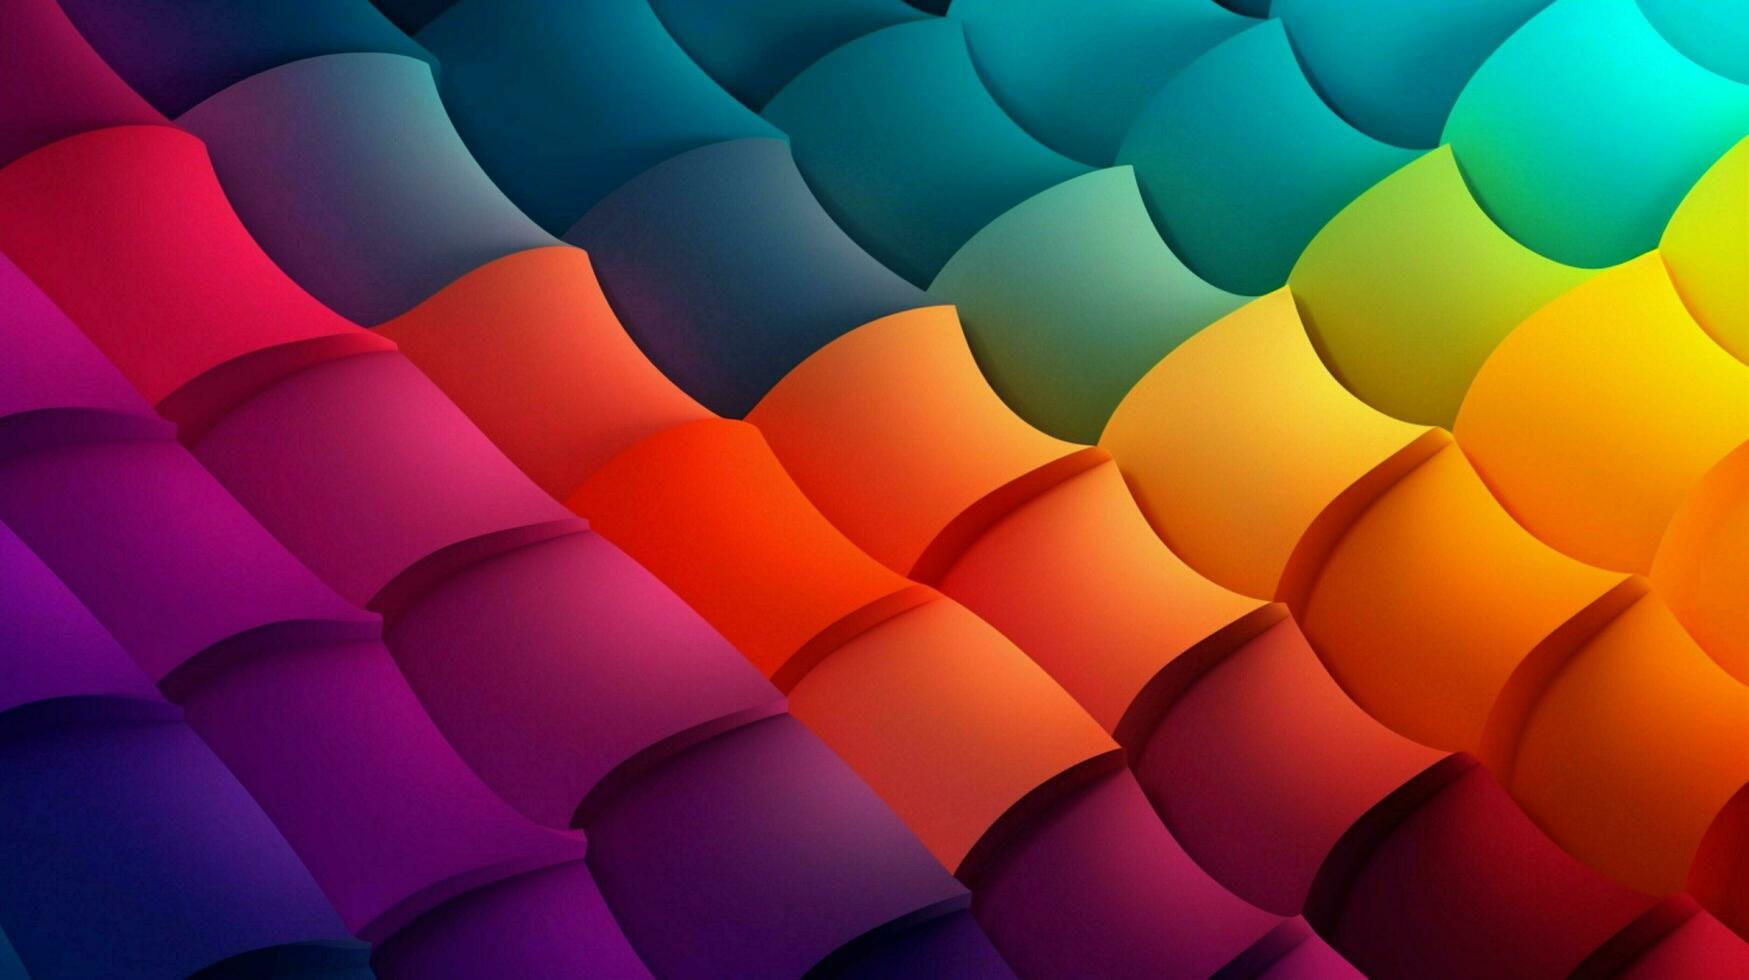 vibrant gradient wallpaper with pops of color and photo